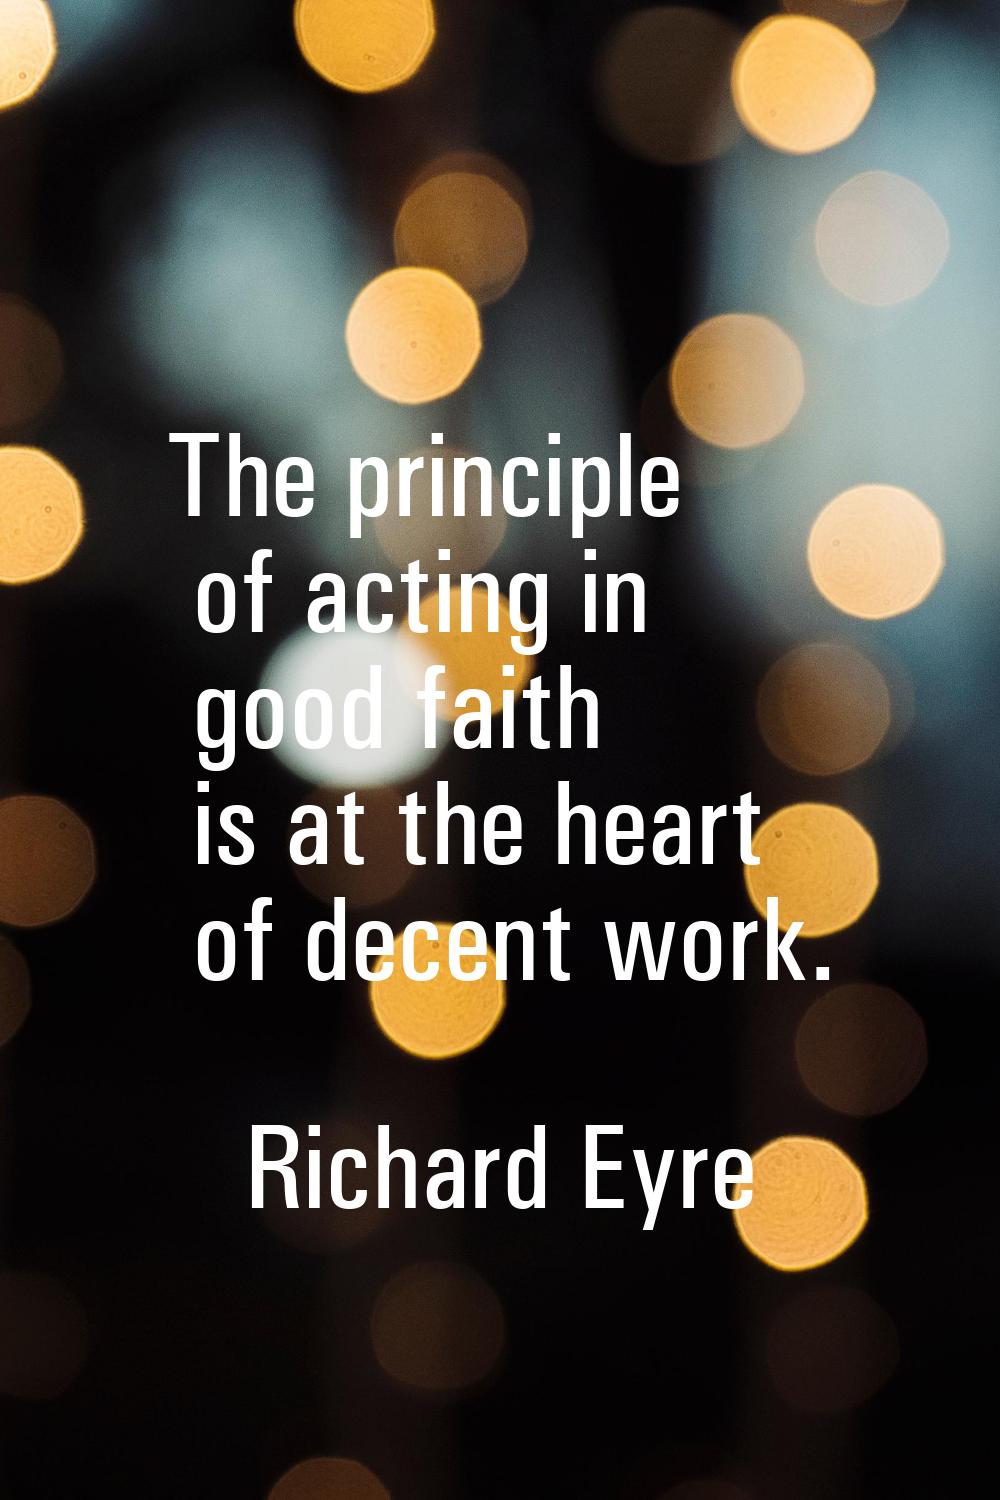 The principle of acting in good faith is at the heart of decent work.